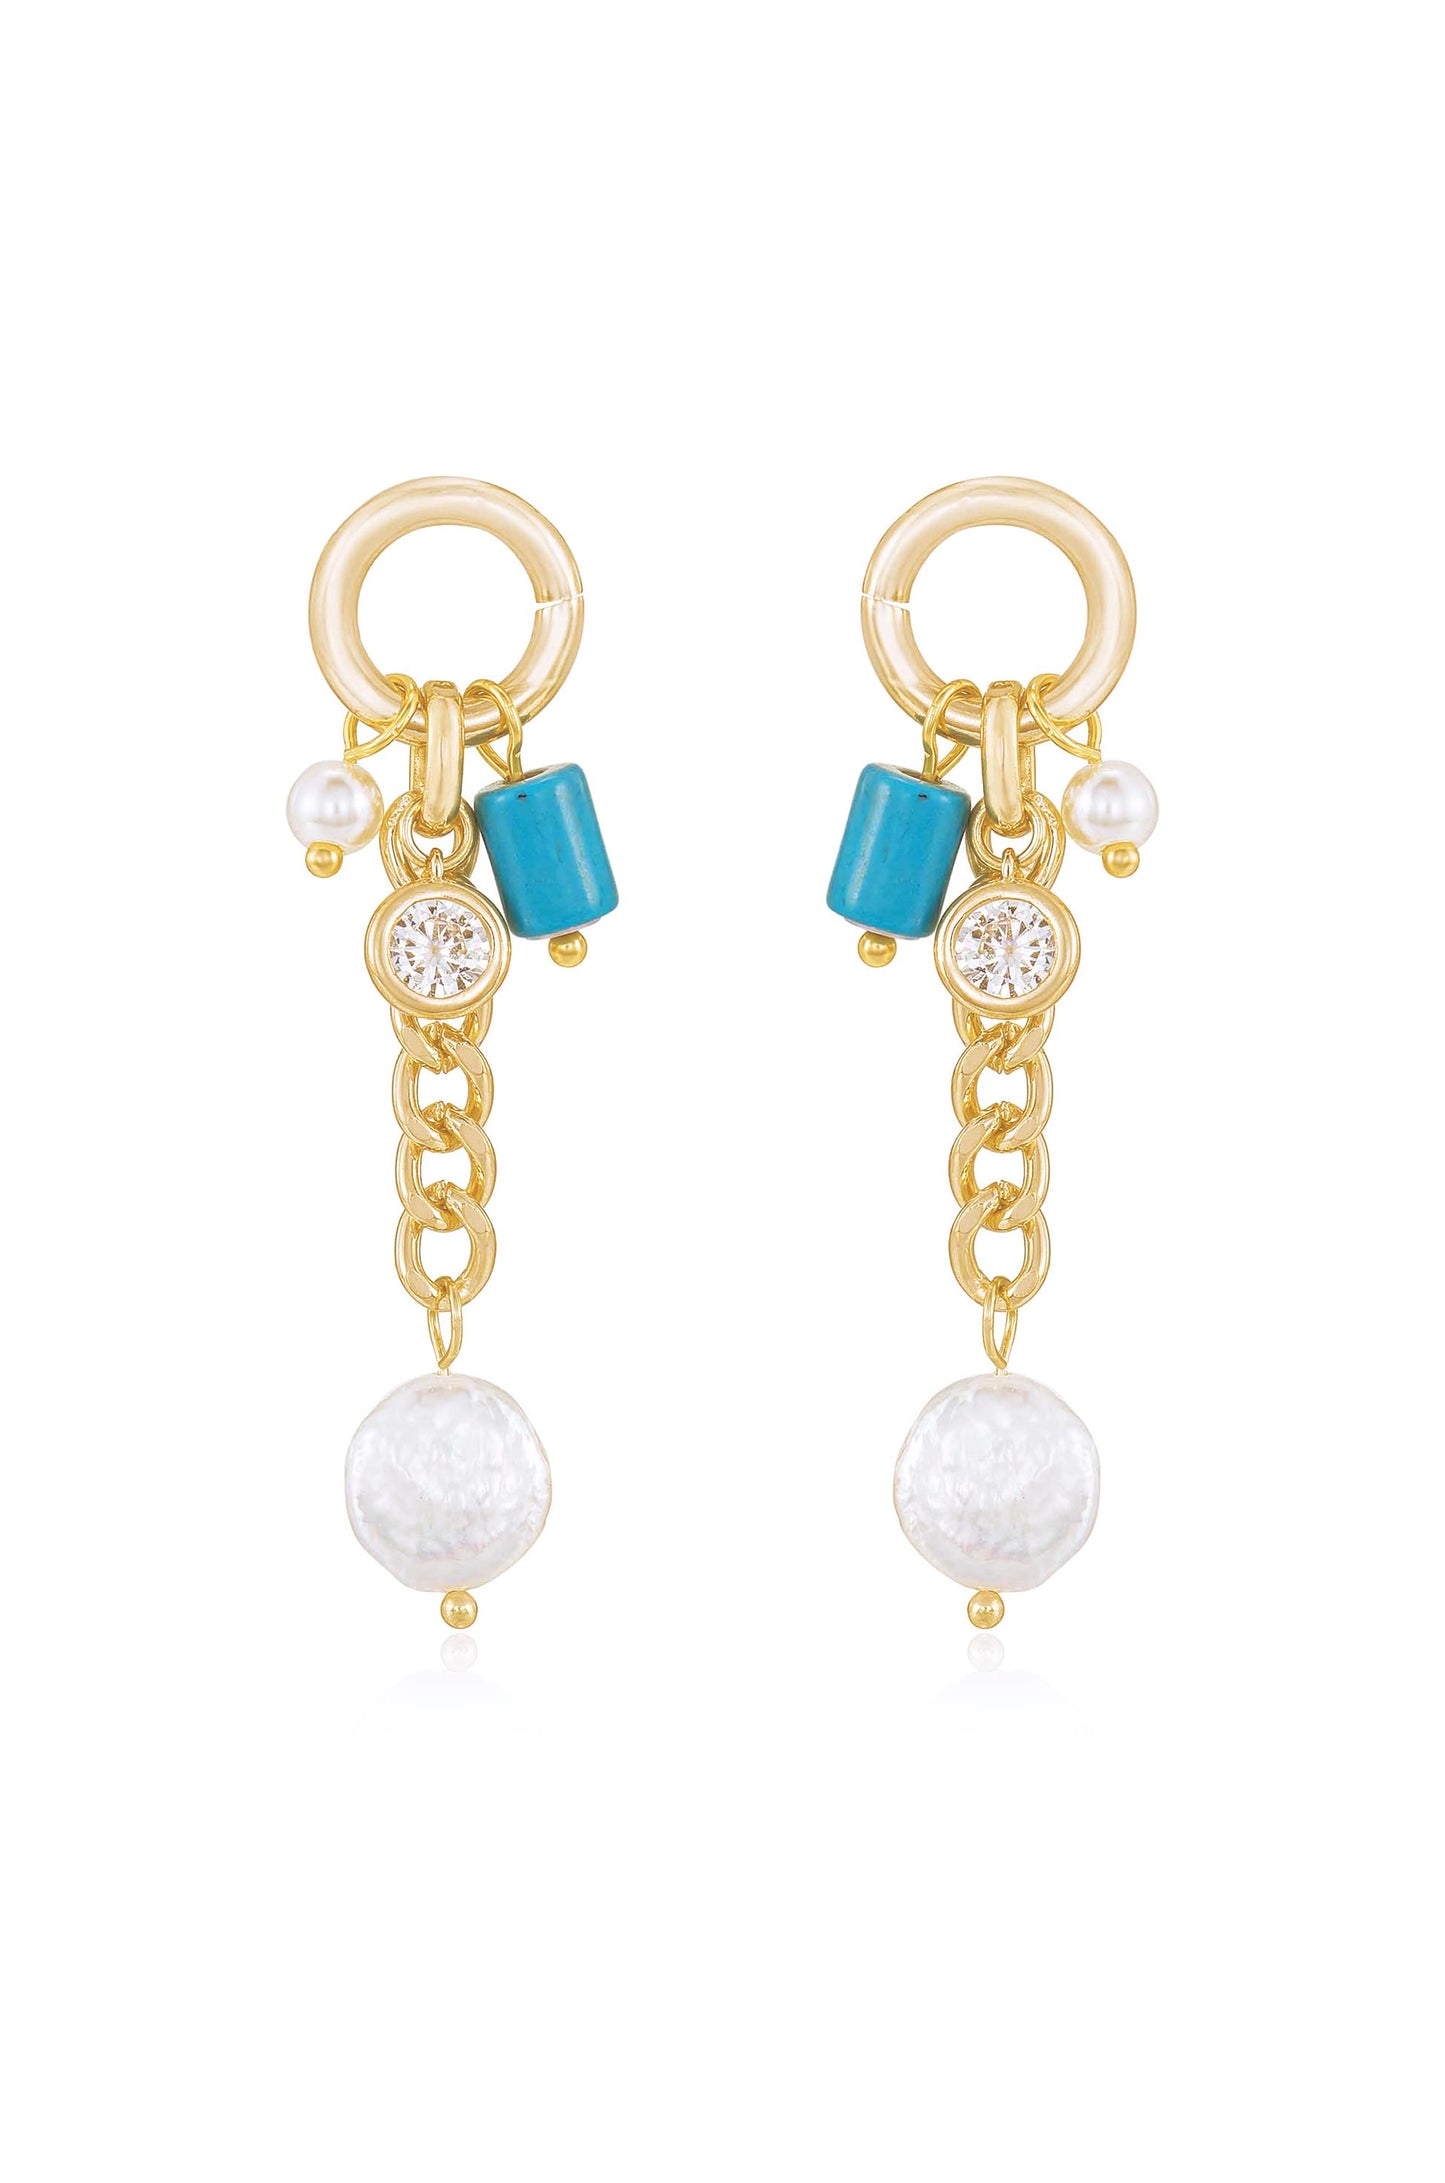 Pearl, Turquoise, and Crystal Charm 18k Gold Plated Dangle Earrings